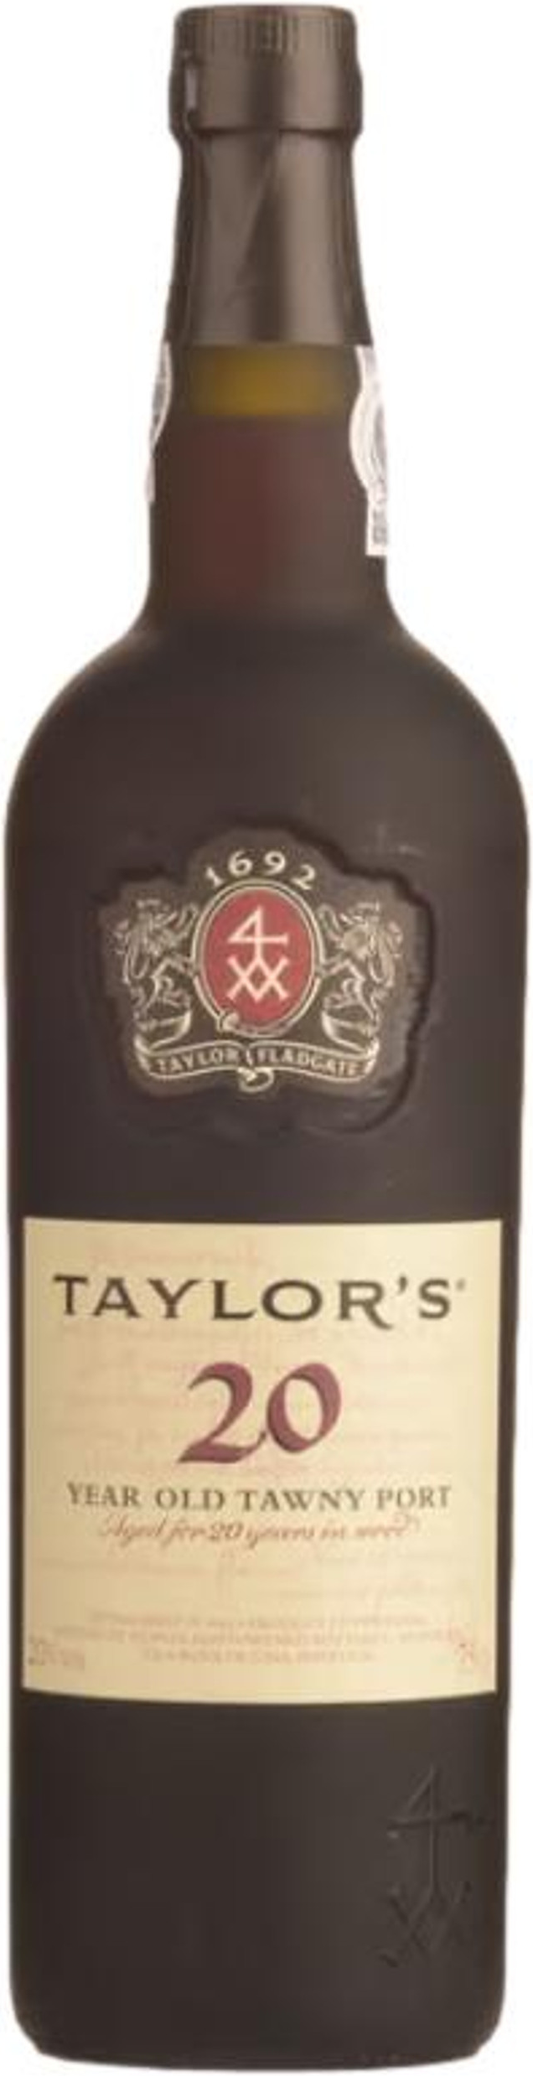 Taylor's 20 Year Old Tawny Port 750ml